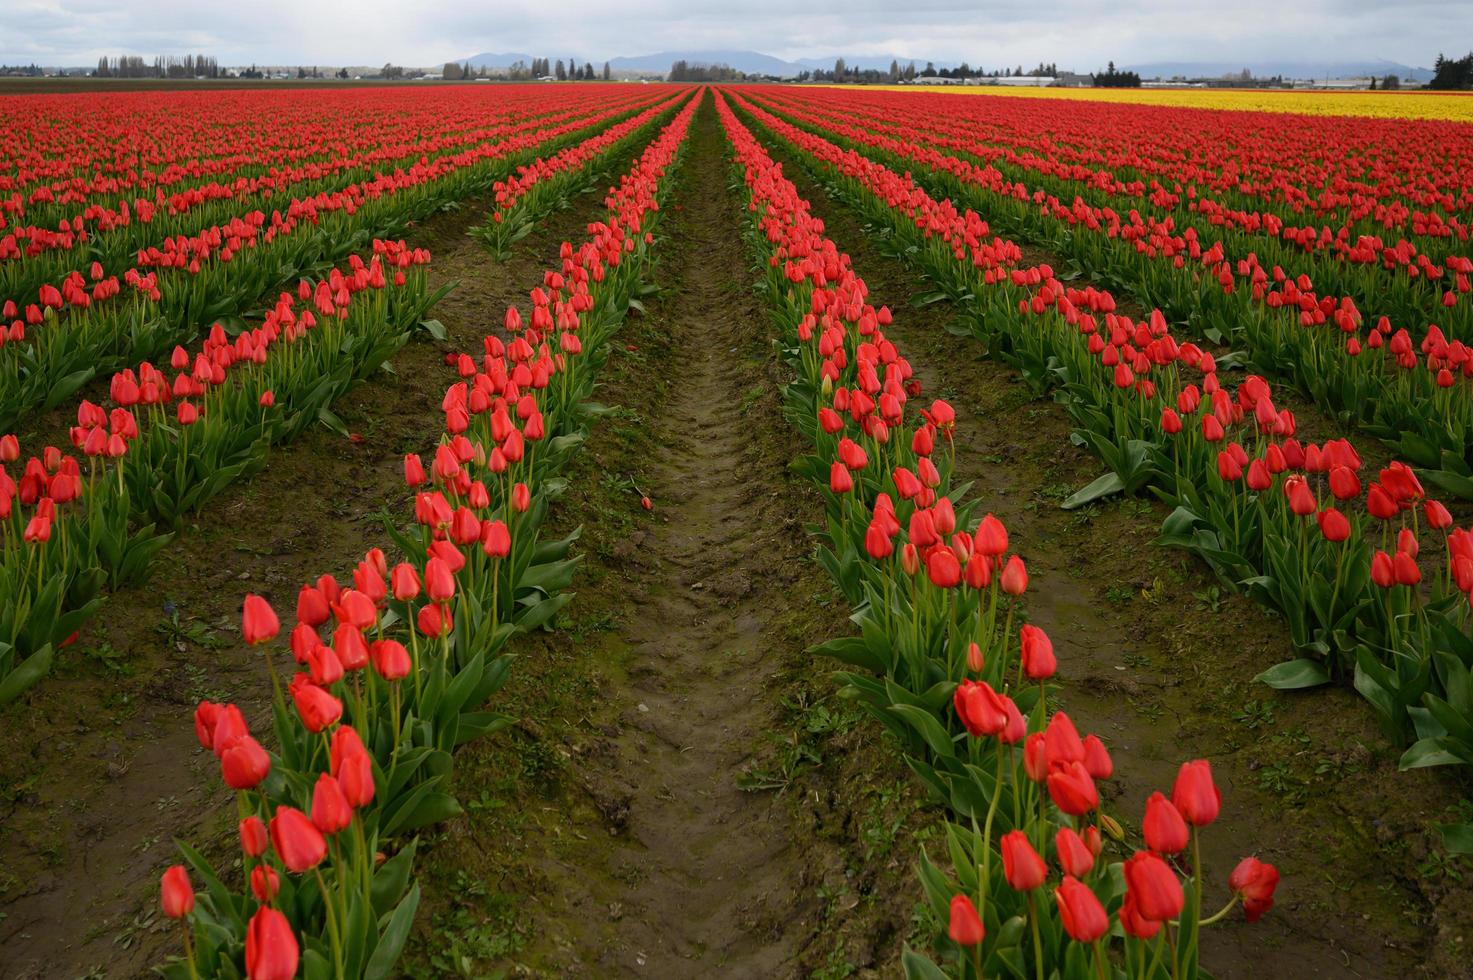 Tulips blooming in a field at the beginning of spring on a cloudy day photo